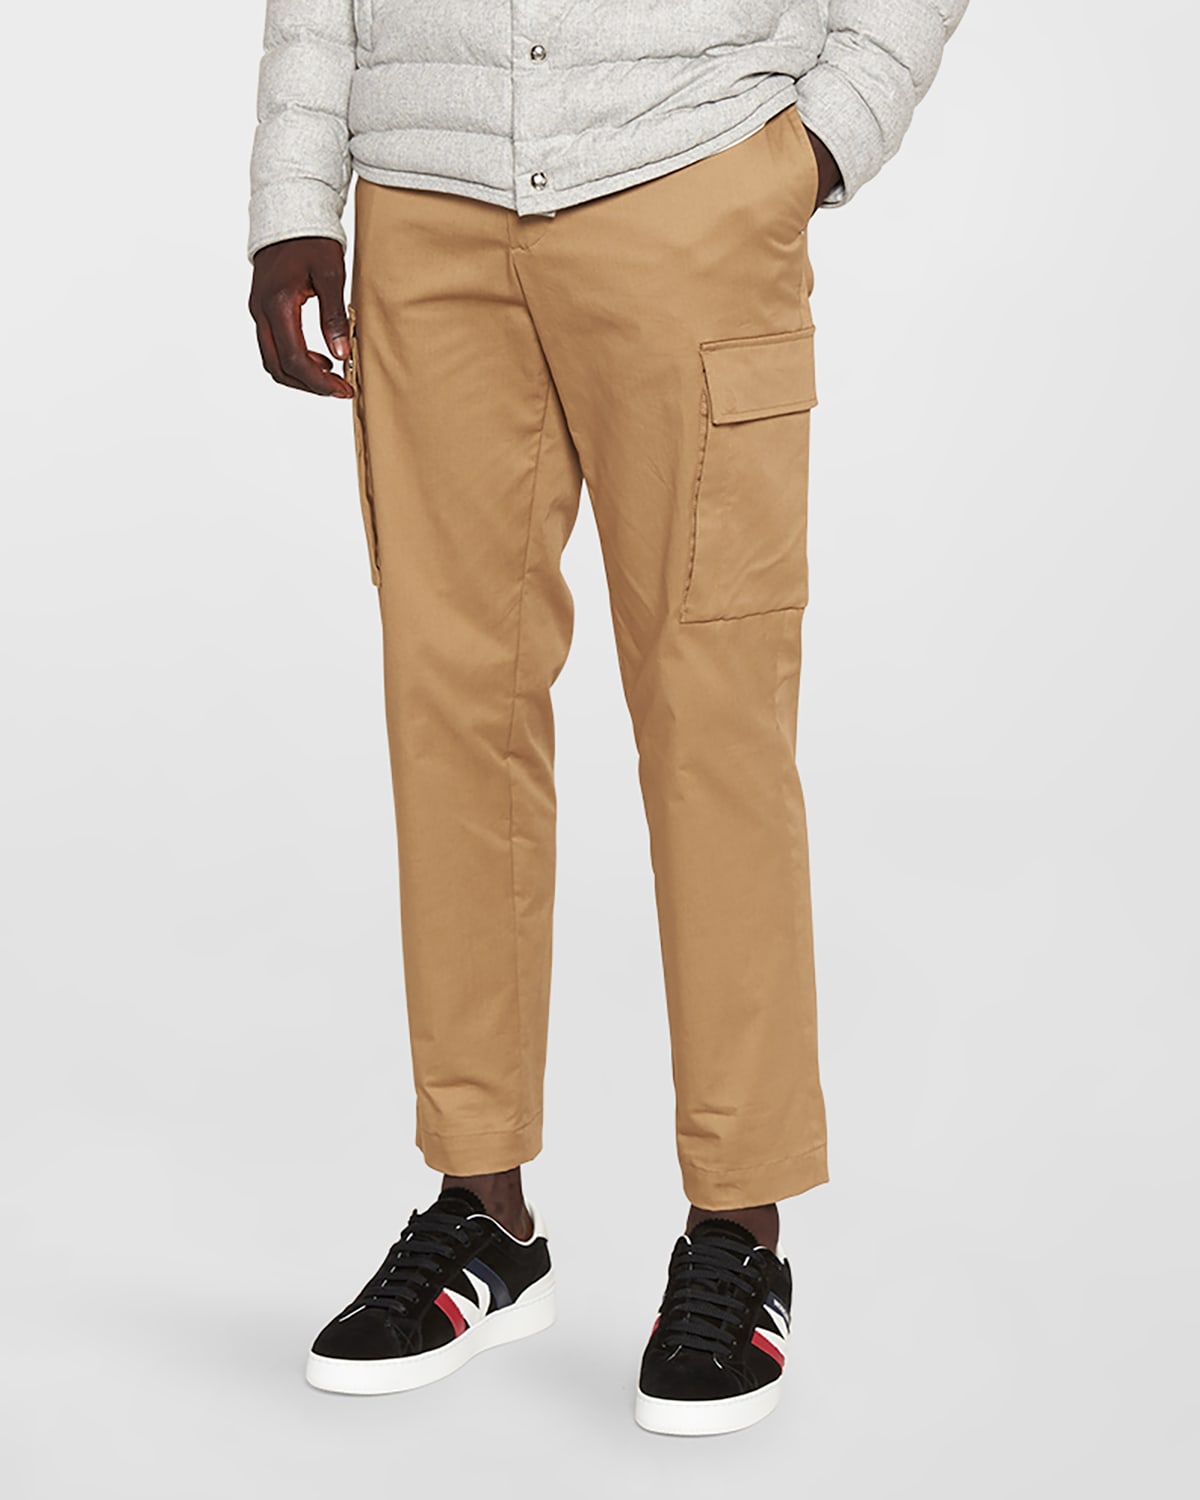 MONCLER MEN'S TWILL CARGO trousers